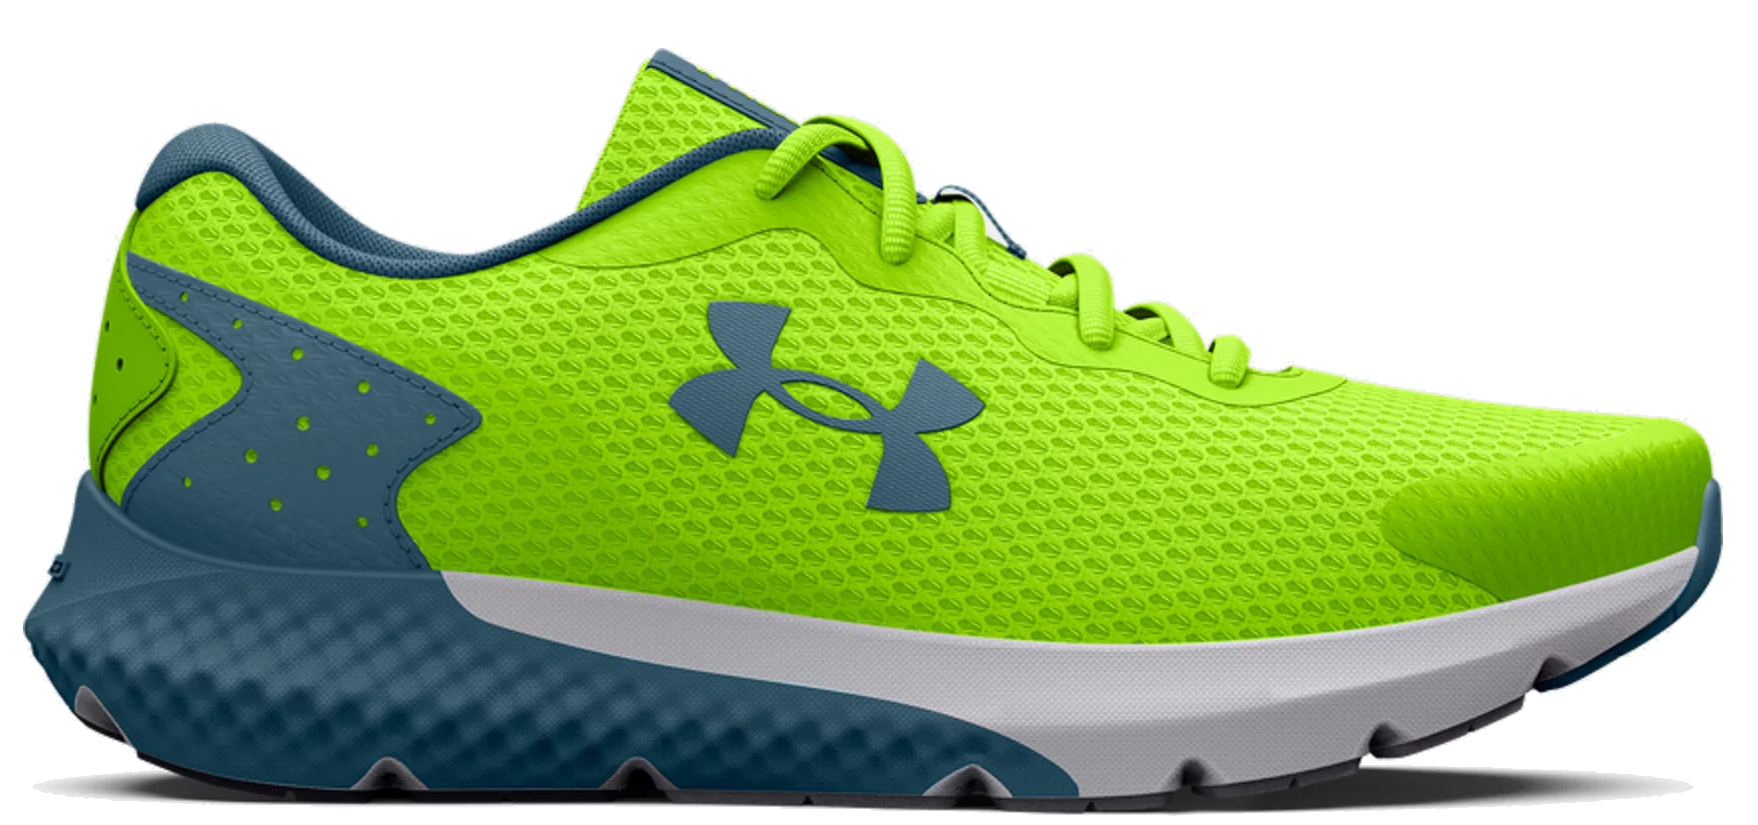 Buty do biegania Under Armour Charged Rogue 3